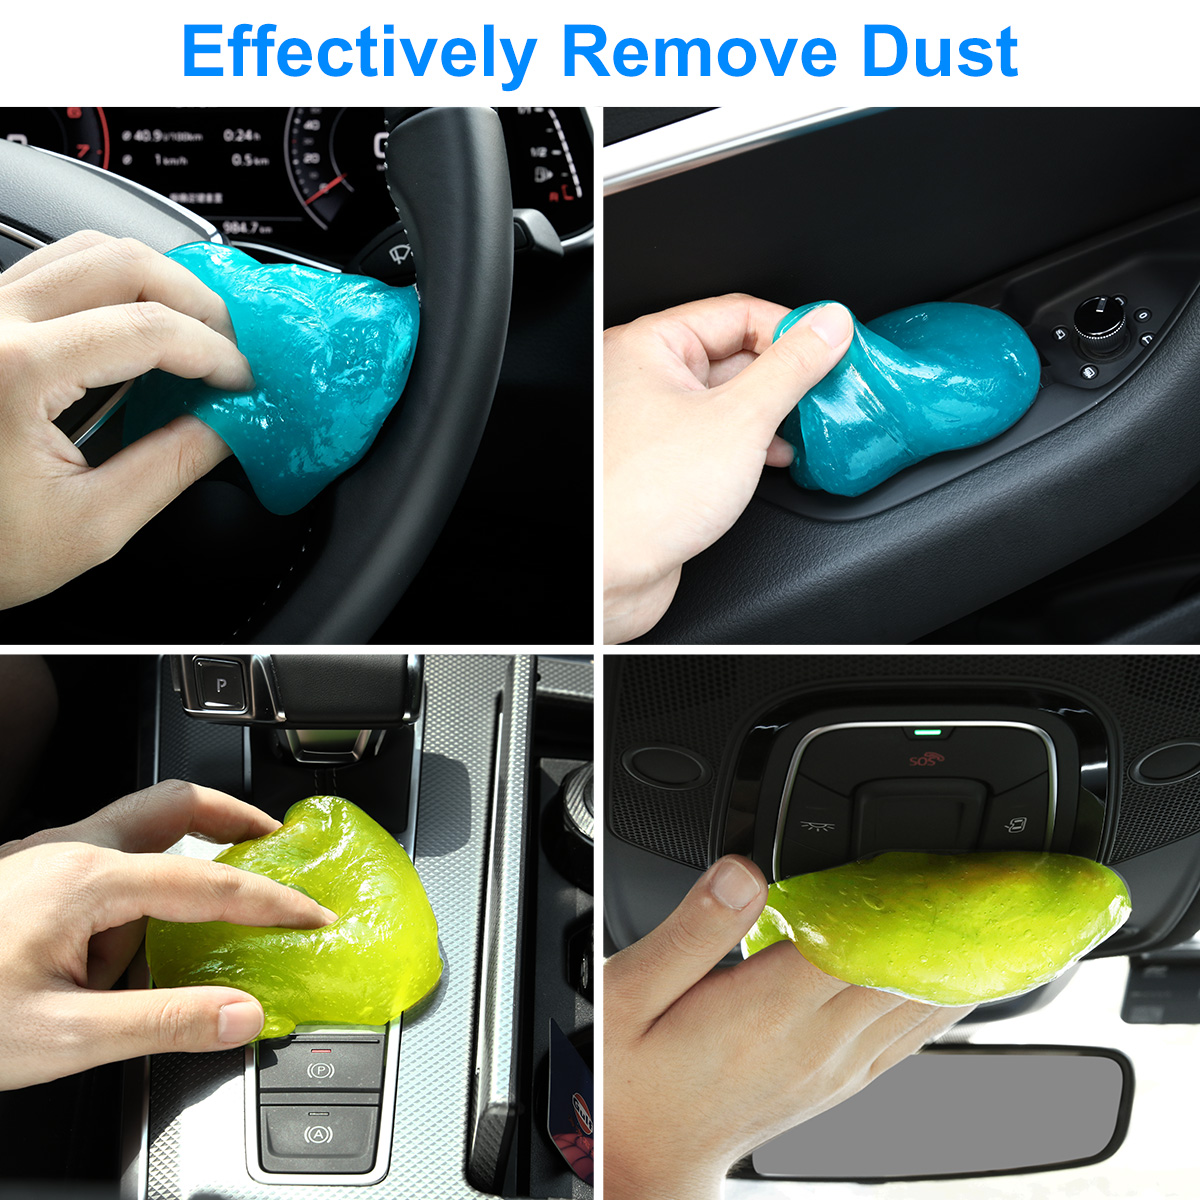 MECO-Cleaning-Gel-Universal-Dust-Cleaner-Gel-Dust-Remover-Keyboard-Cleaning-Tools-for-Keyboards-Car--1795370-6